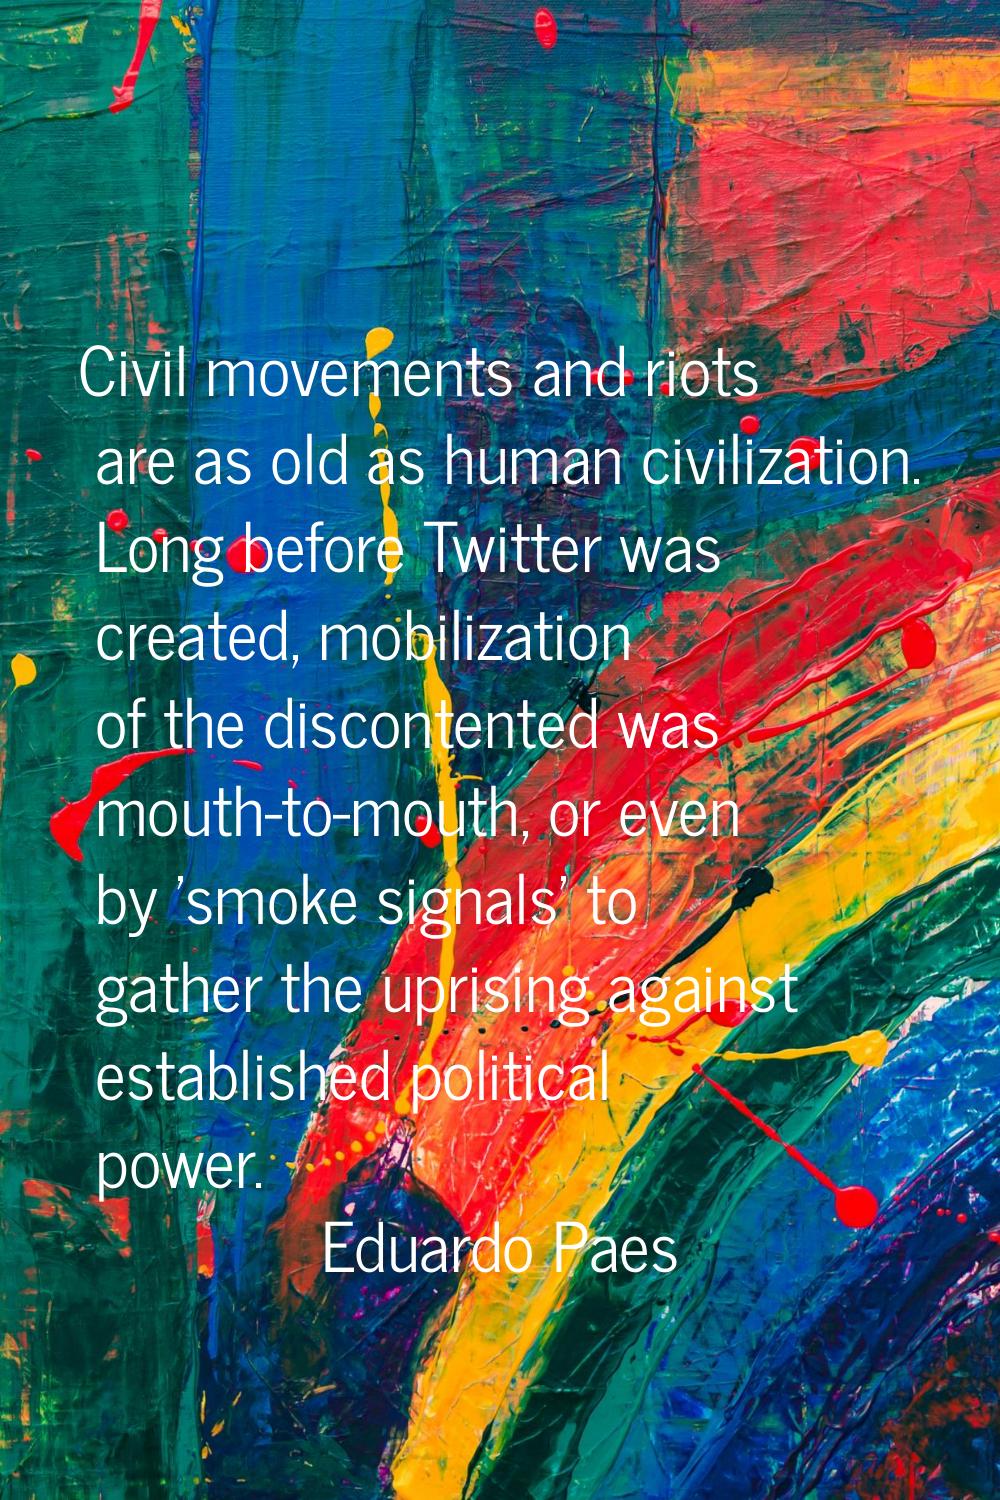 Civil movements and riots are as old as human civilization. Long before Twitter was created, mobili